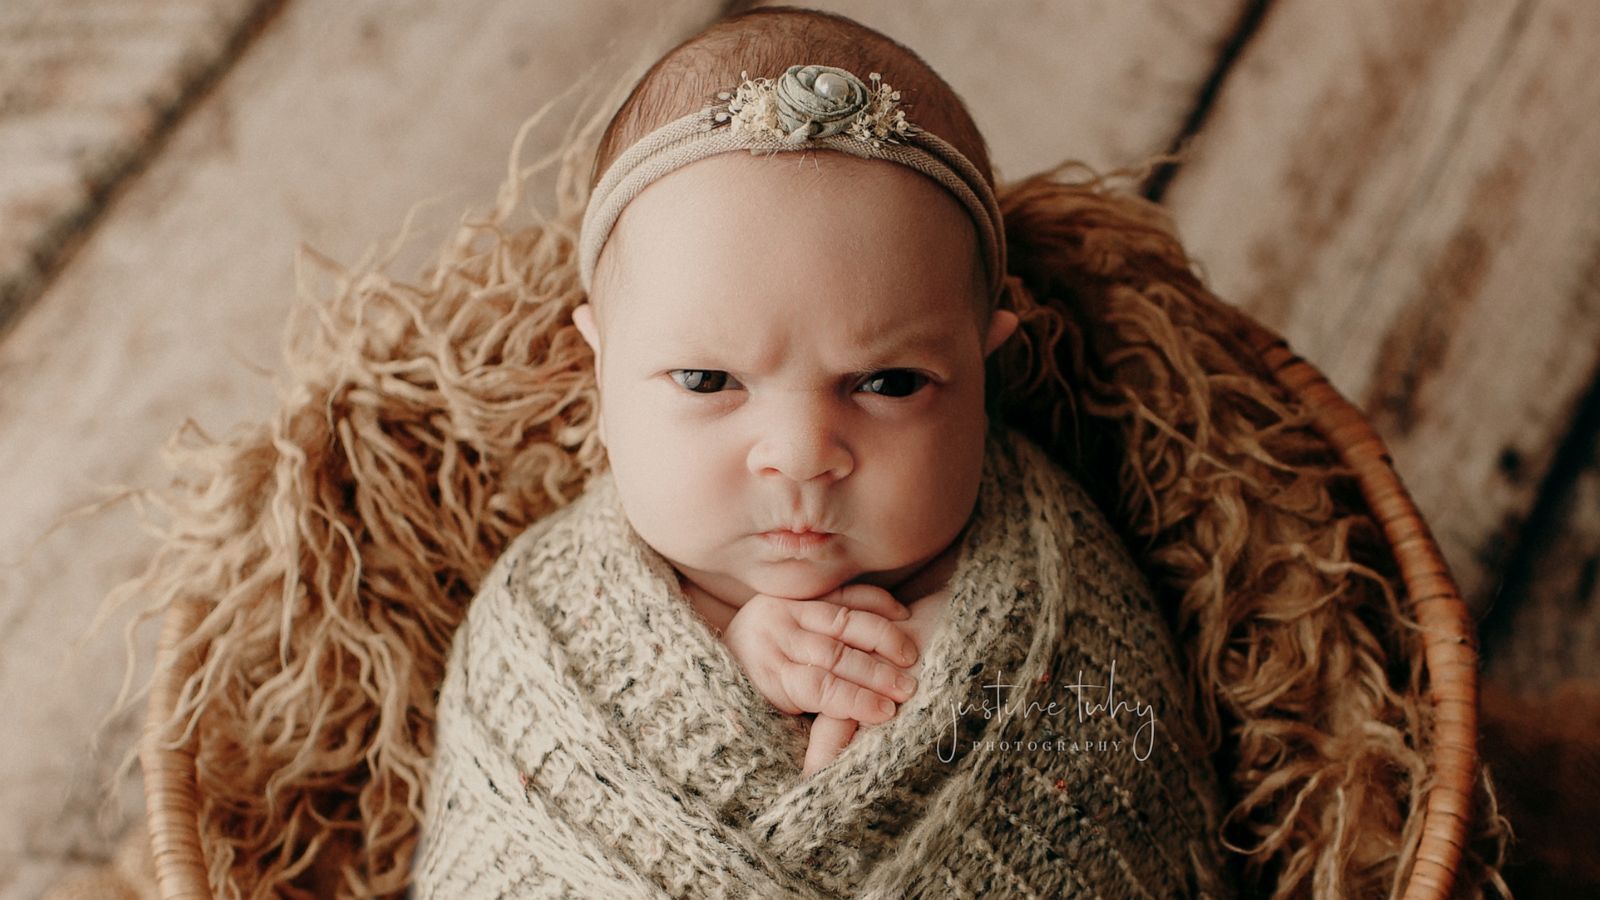 This baby is not feeling it during her newborn photo session